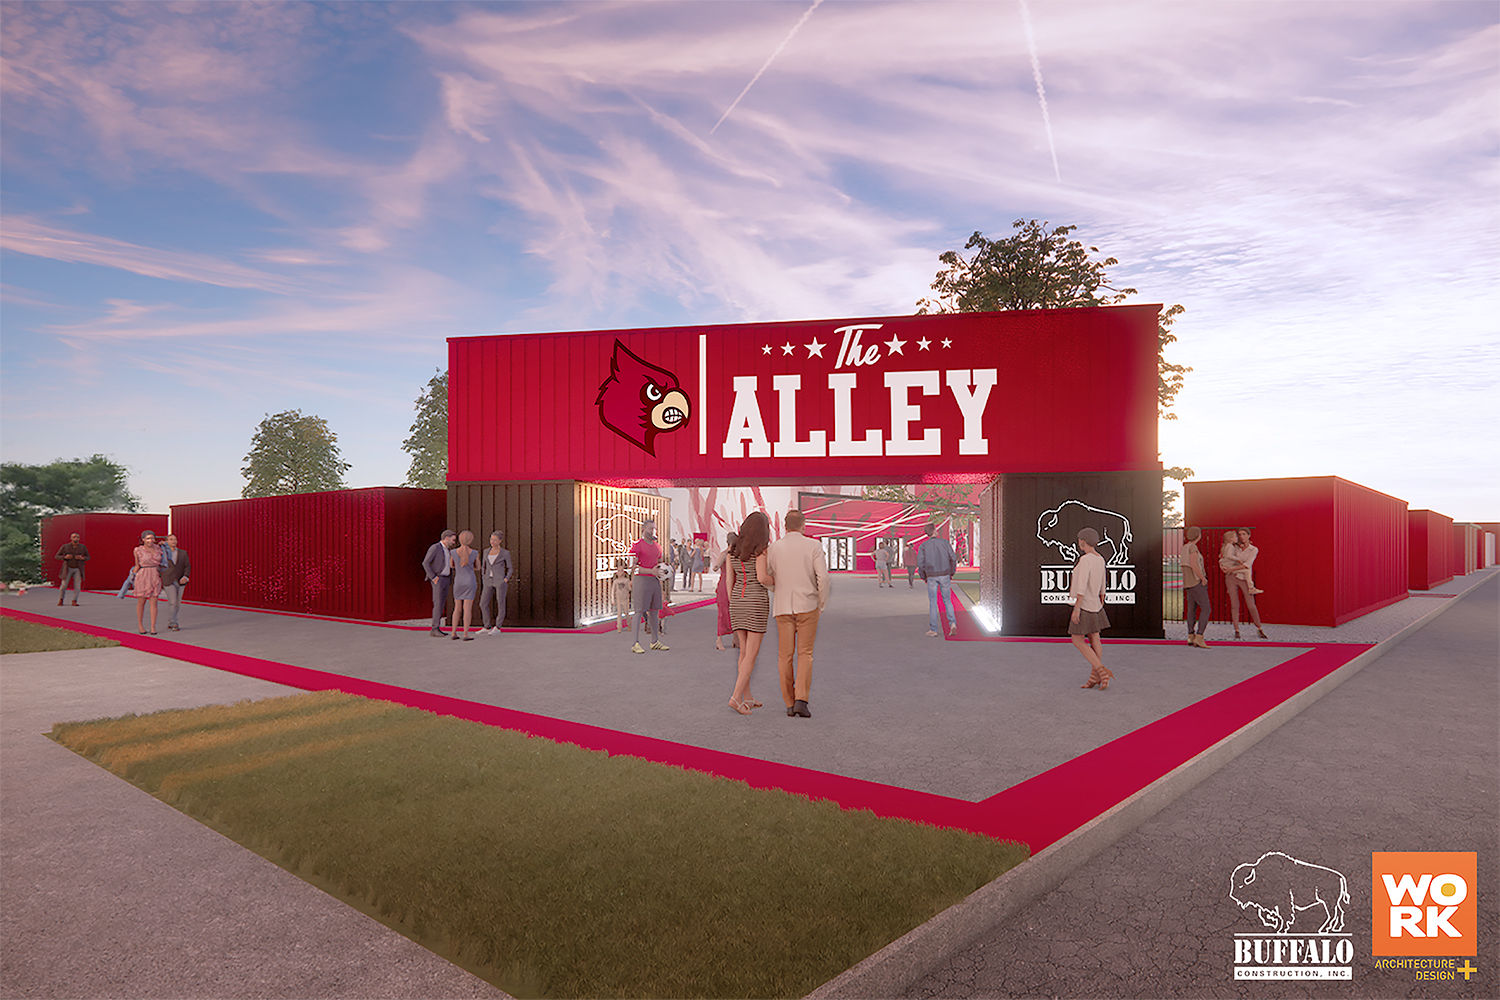 FB: The Alley is an improvement coming to Cardinal Stadium this season